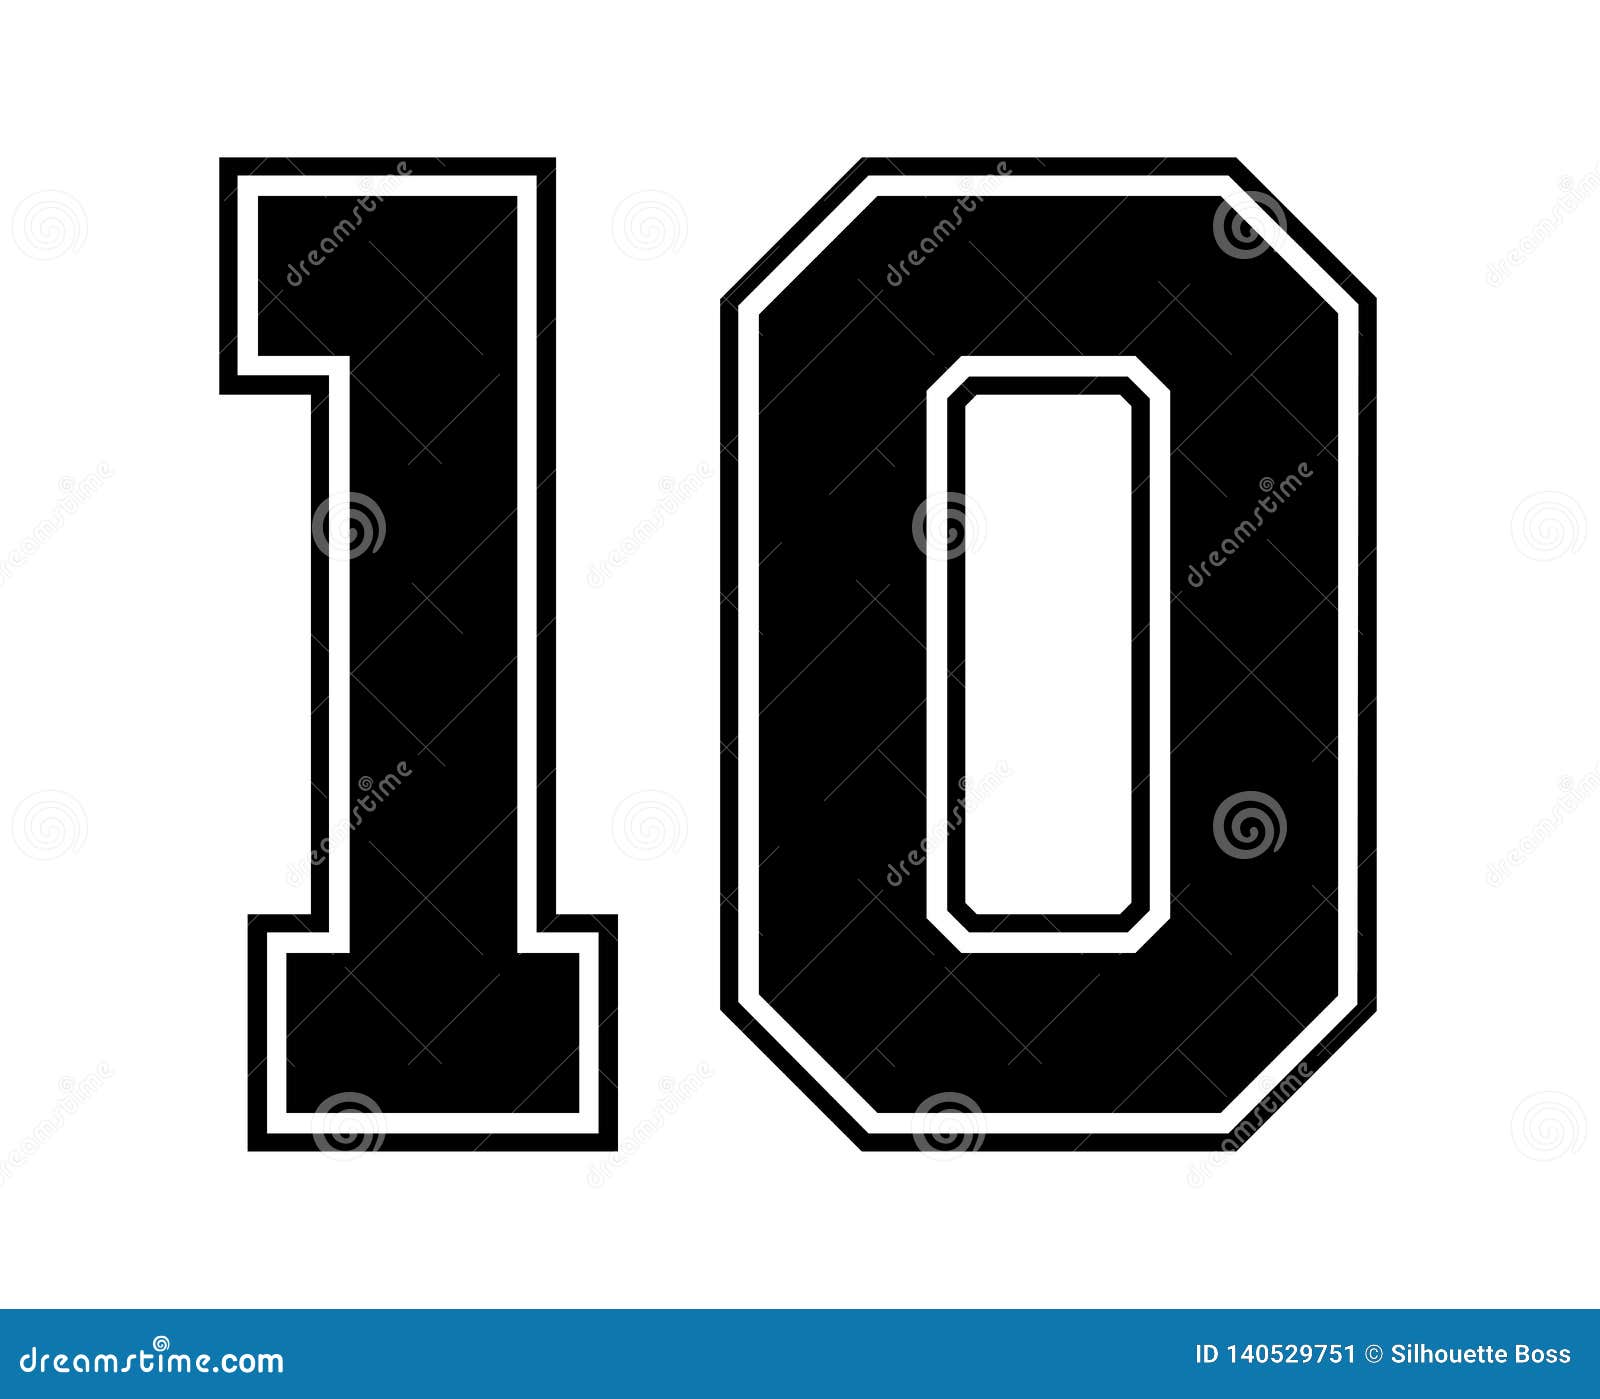 10 number jersey in football